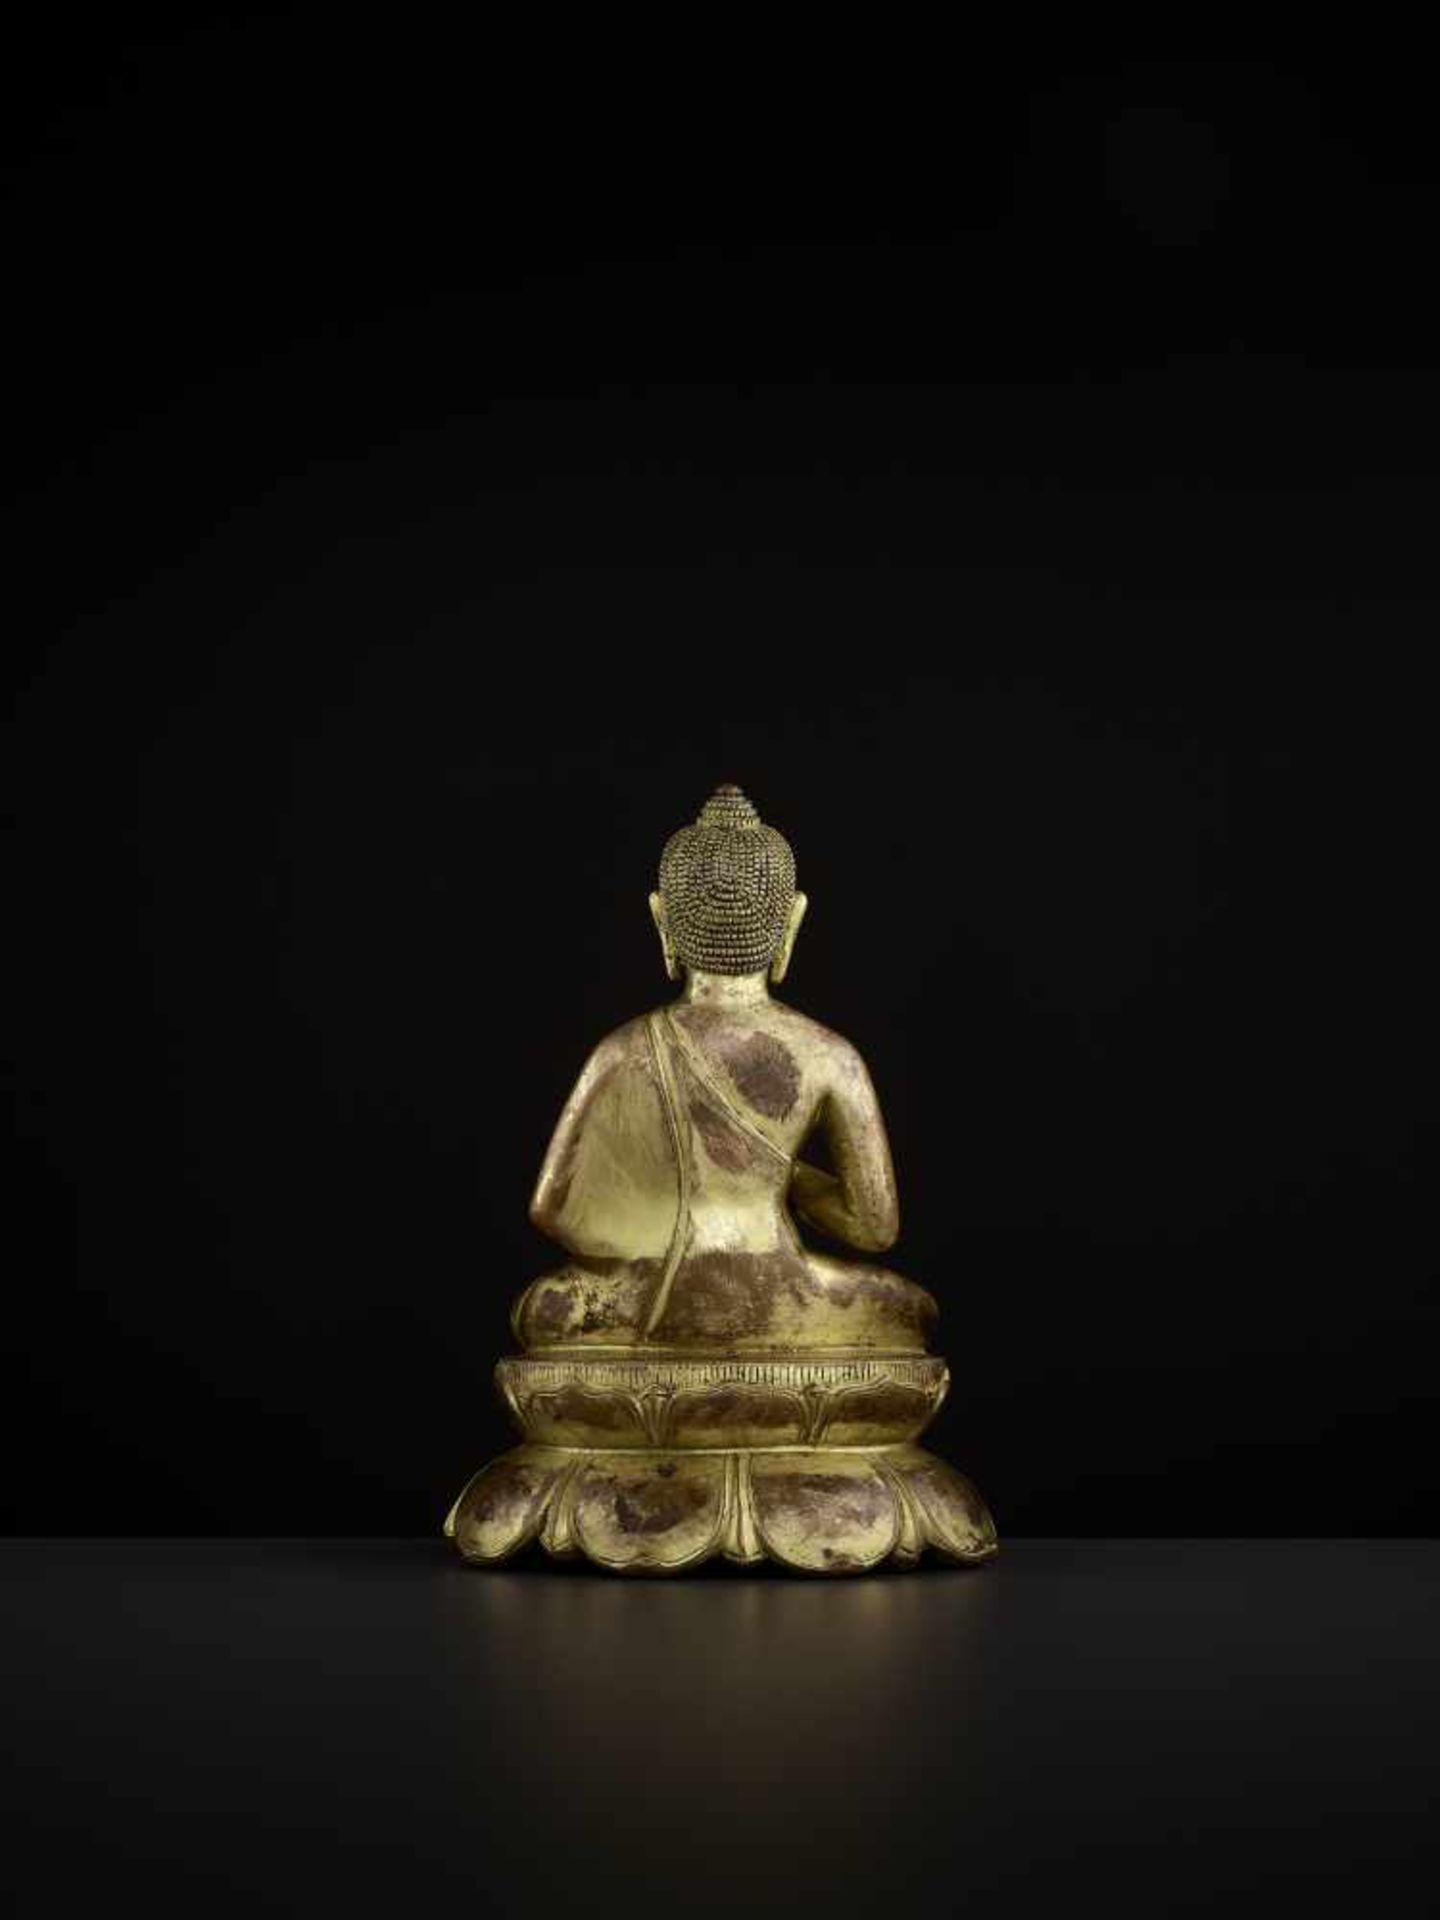 A BUDDHA AMOGHASIDDHI, NEPAL 17TH CENTURY The heavily cast gilt copper-alloy figure is seated in - Image 6 of 14